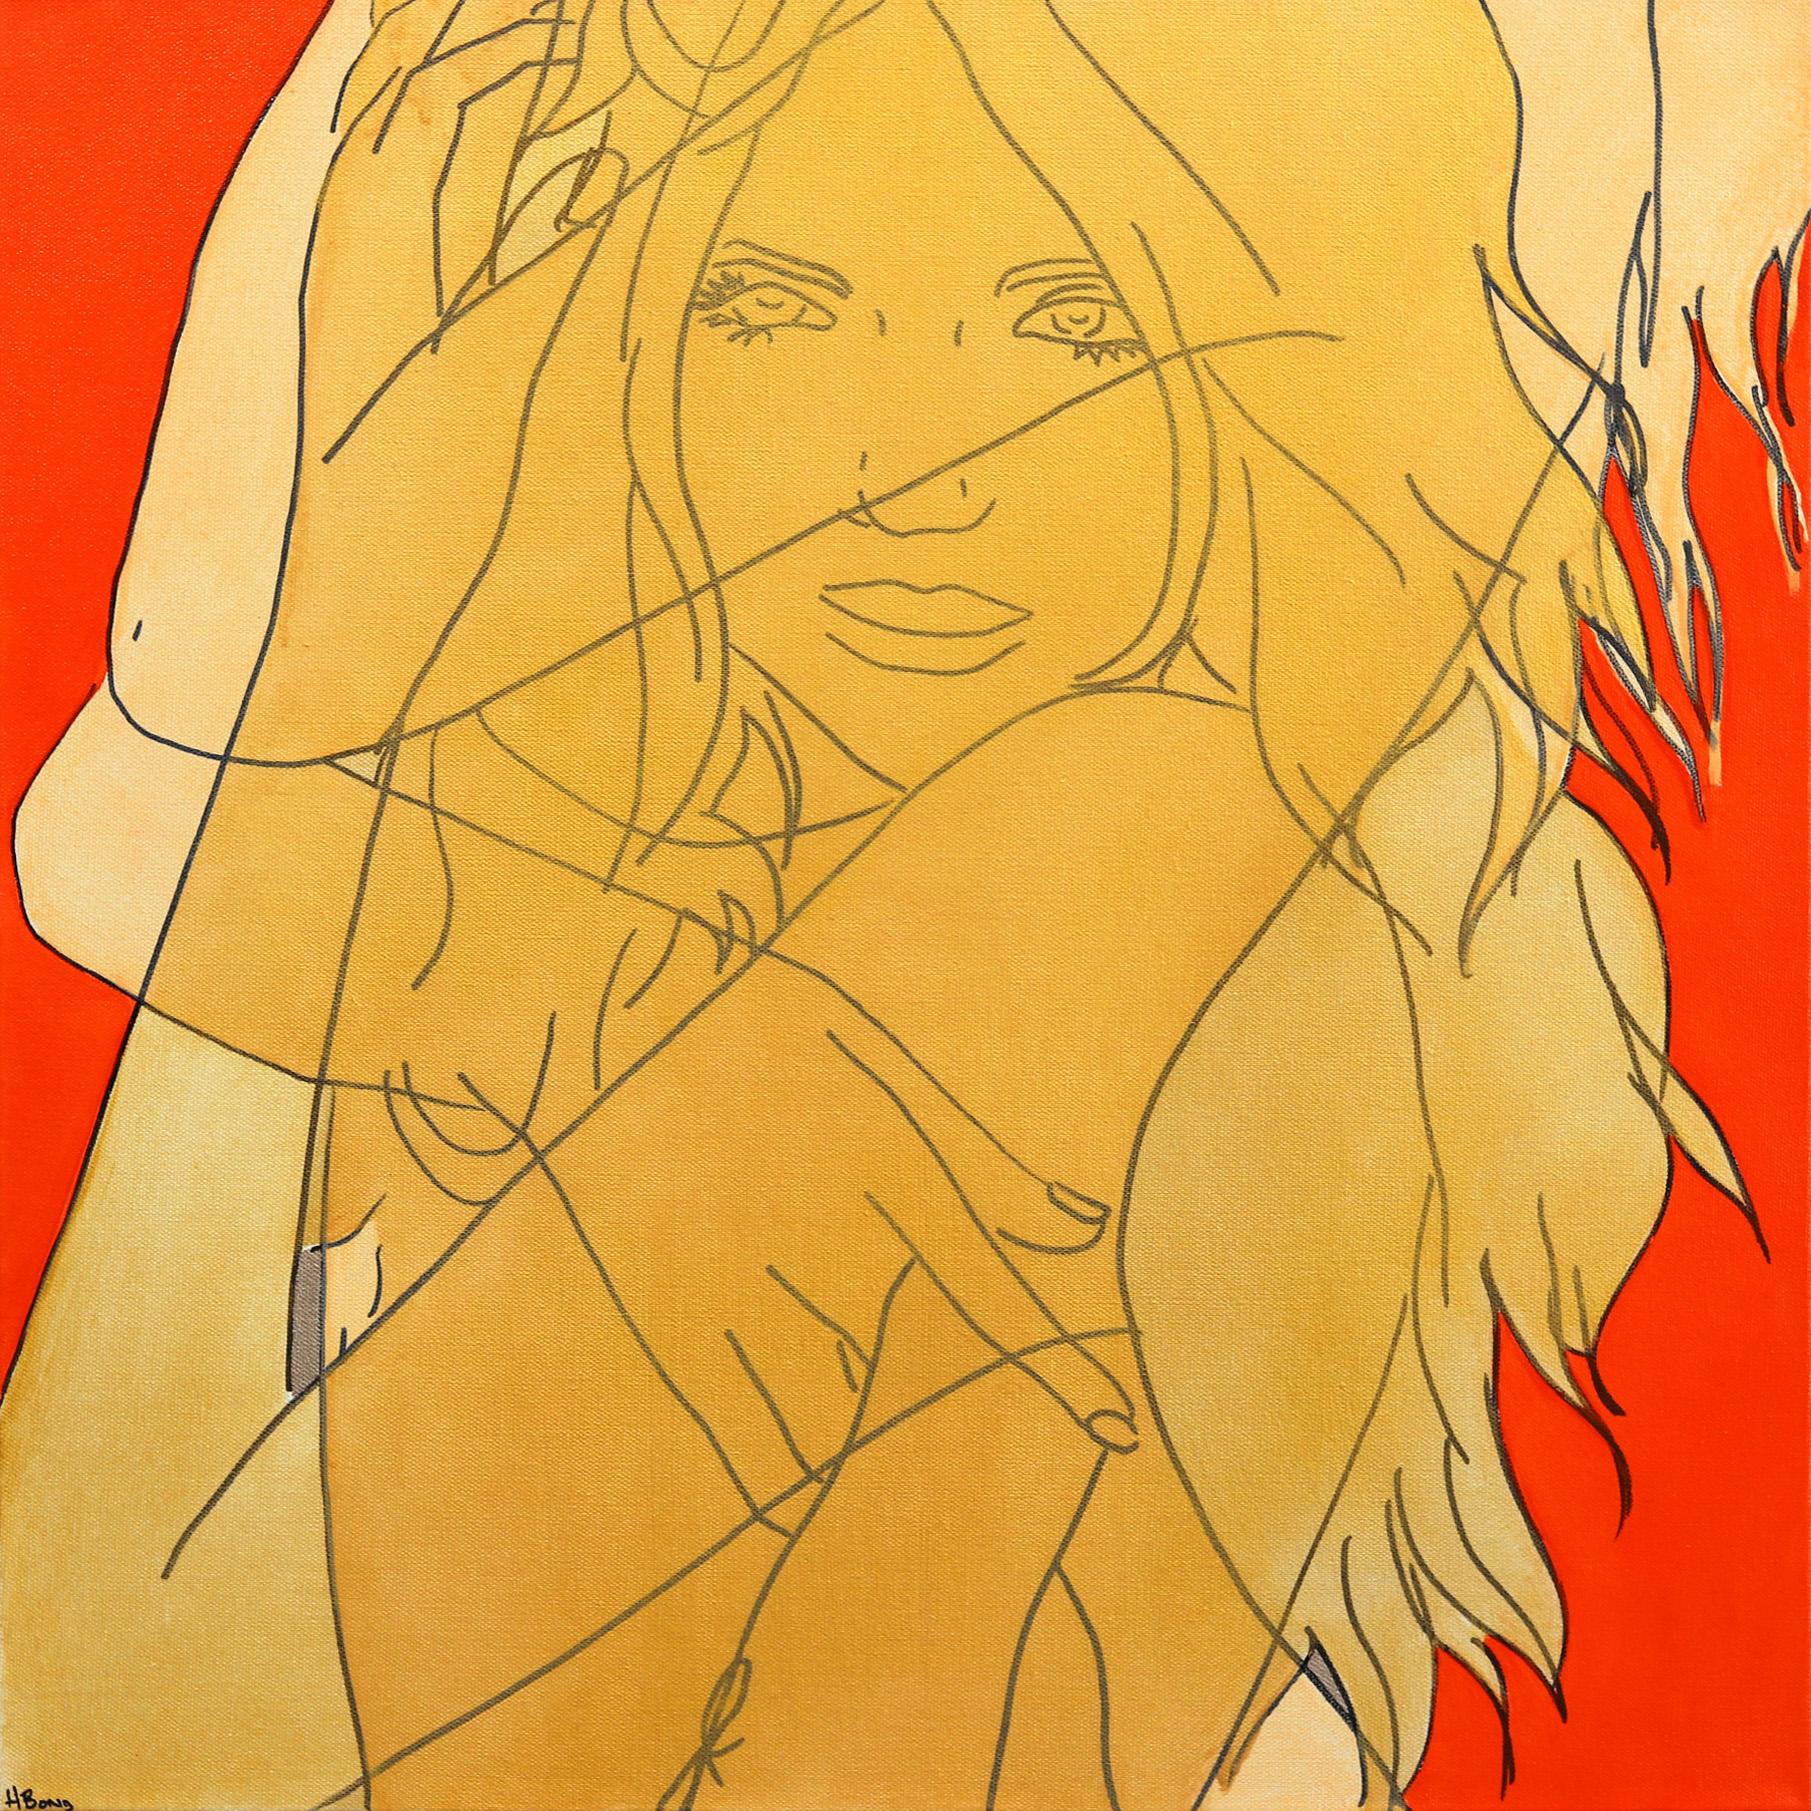 Untitled (Fire III) - Figurative Portrait Red and Yellow Woman Pop Art Painting - Mixed Media Art by Hilary Bond